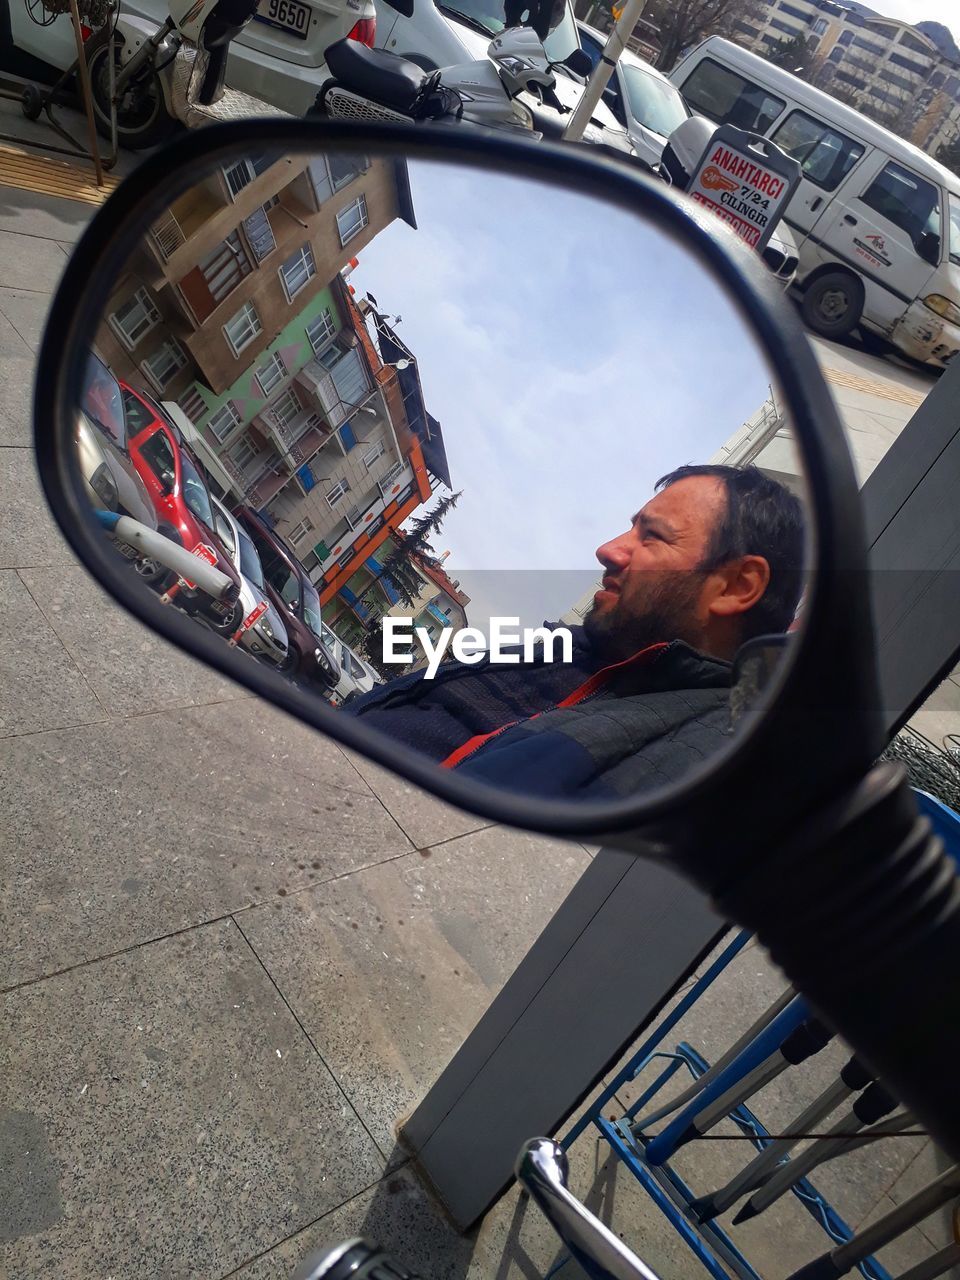 REFLECTION OF MAN PHOTOGRAPHING CAR ON MIRROR